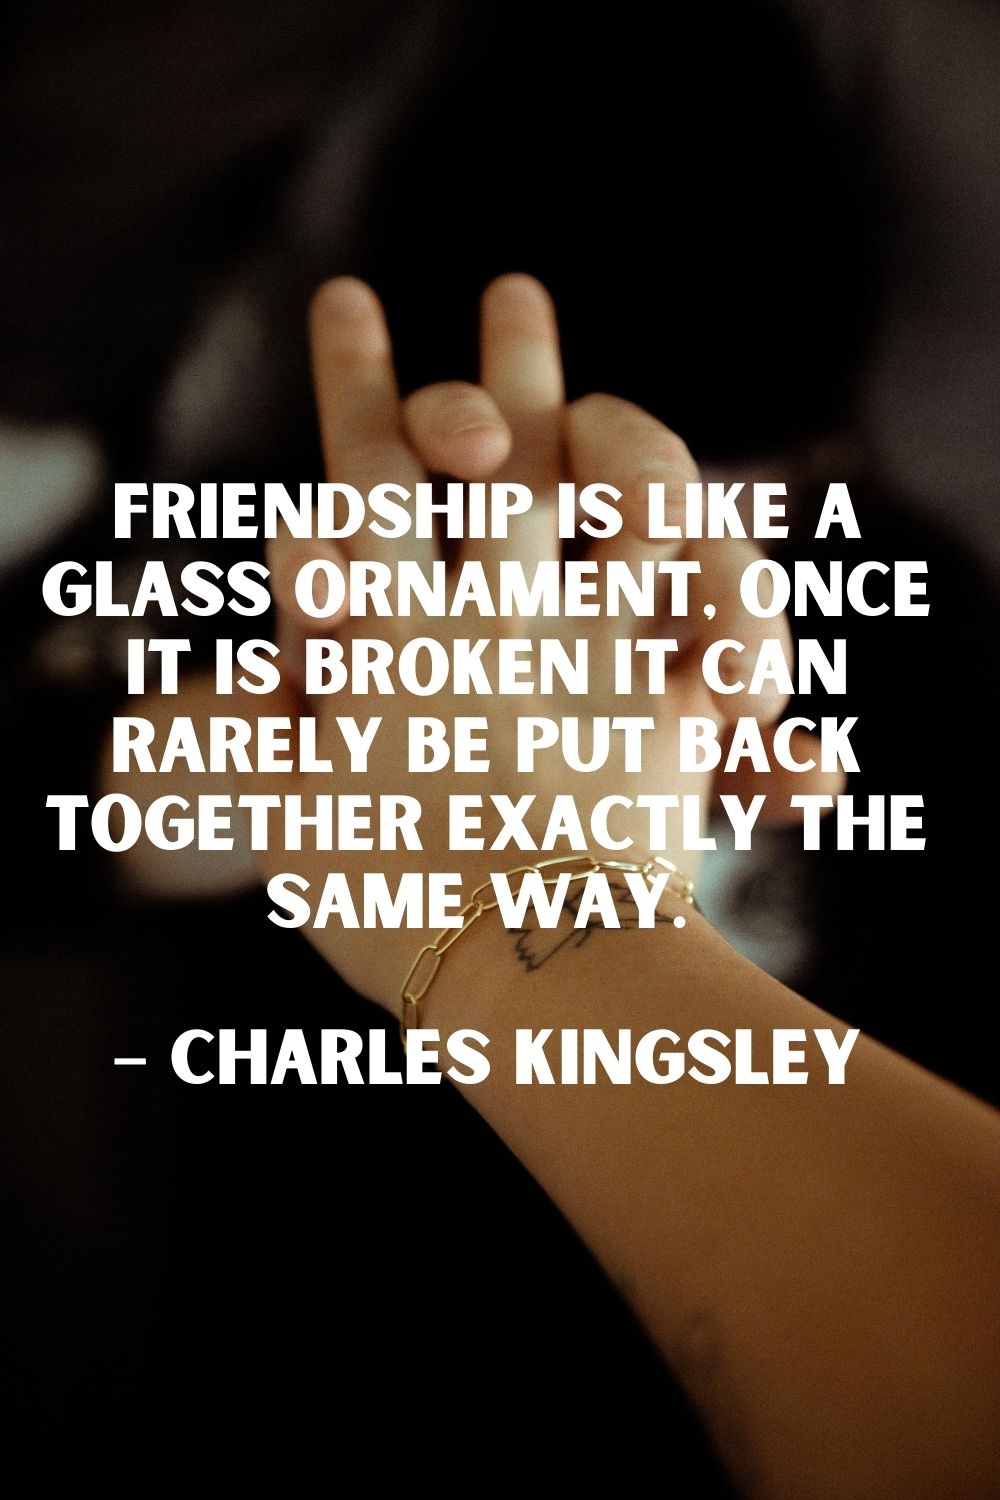 Friendship is like a glass ornament once it is broken it can rarely be put back together exactly the same way. – Charles Kingsley